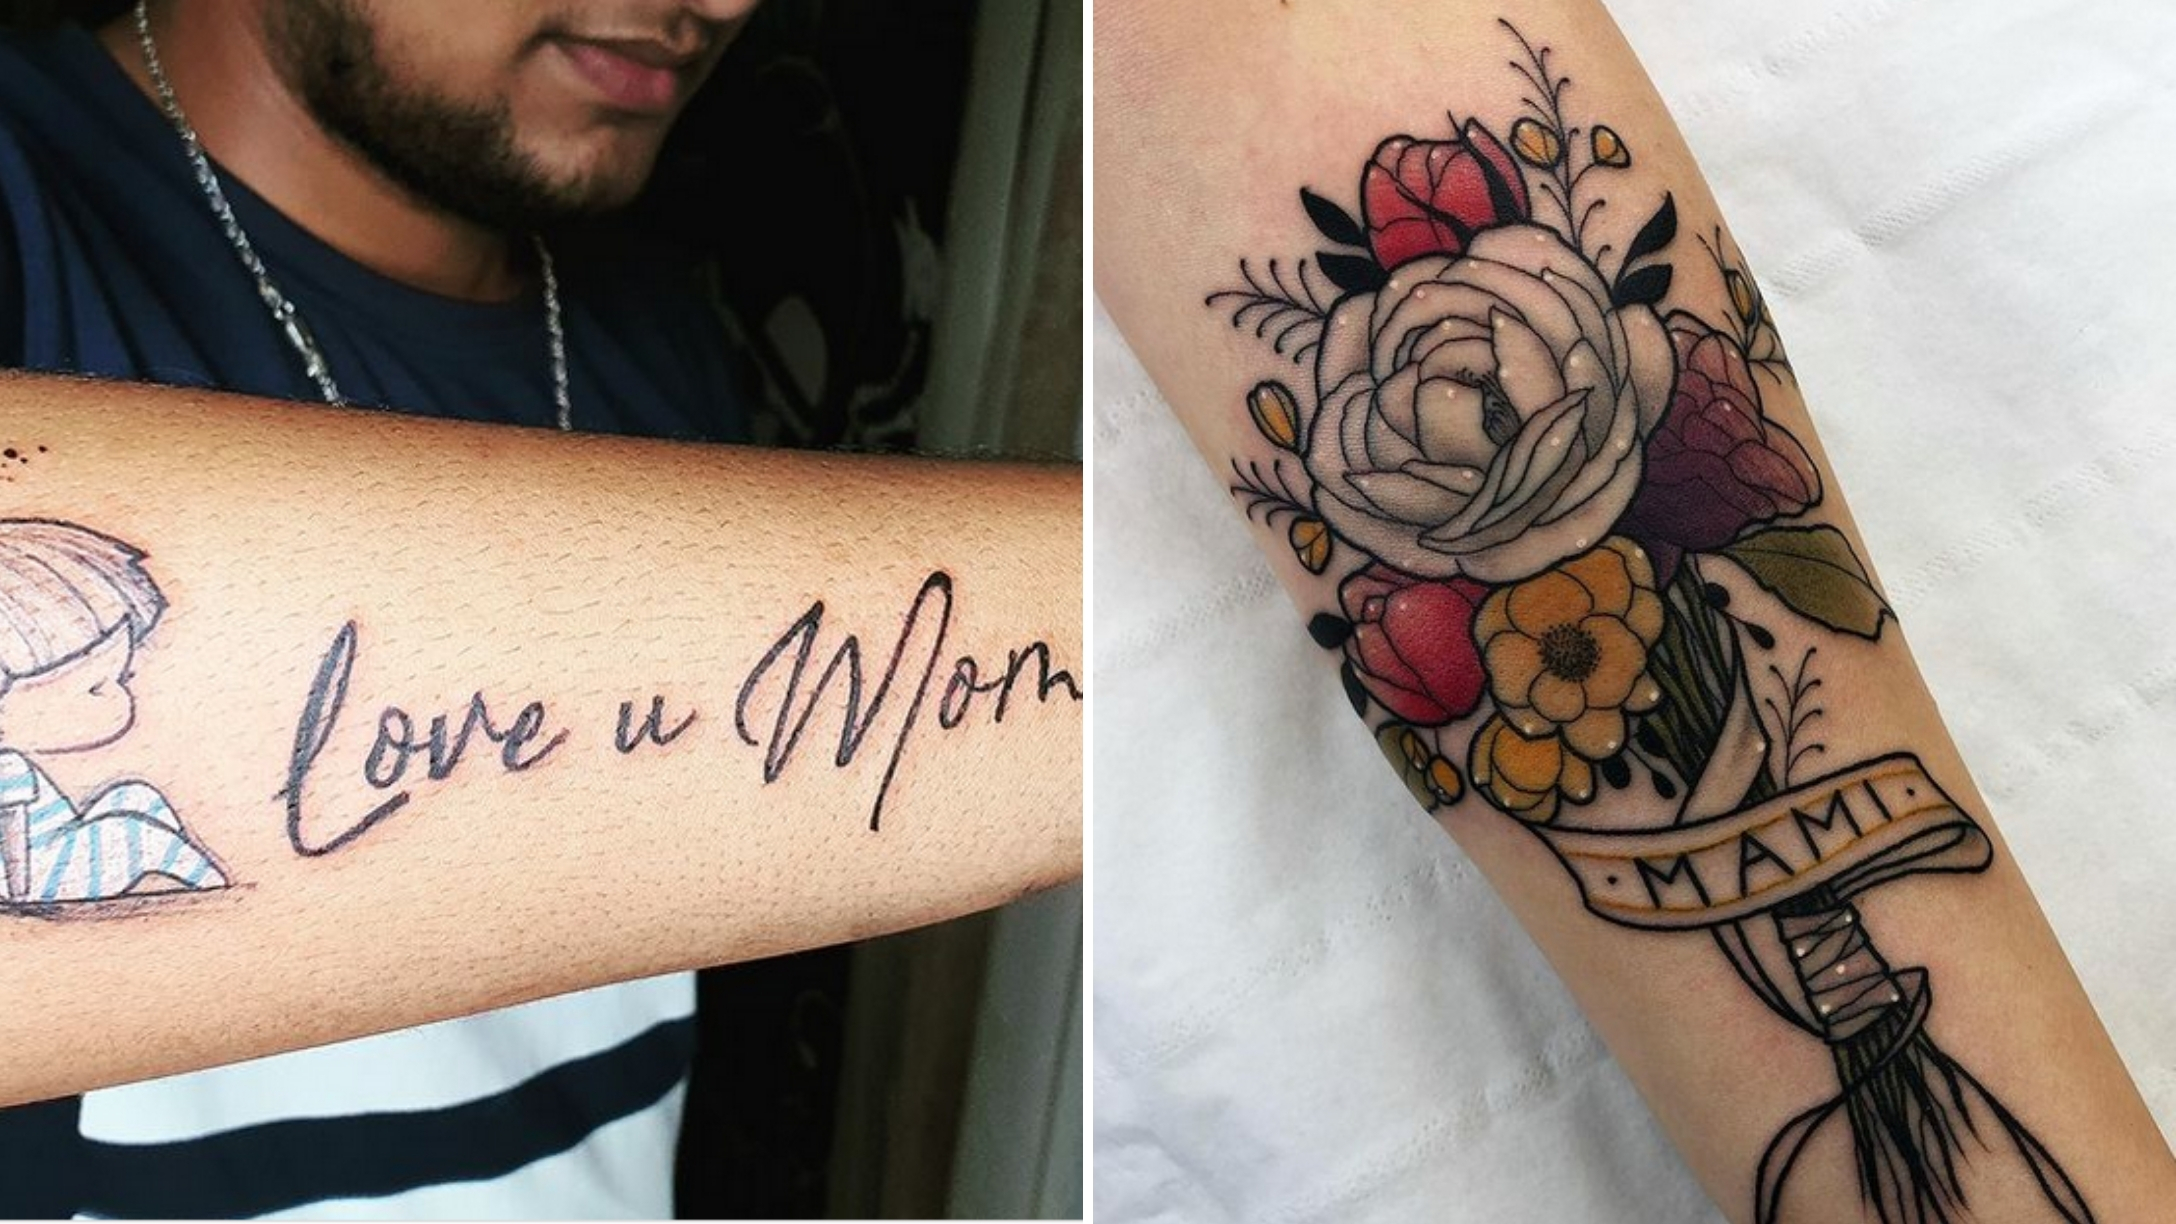 Mothers Portrait Tattoo  In memory of loved ones  Black Poison Tattoos